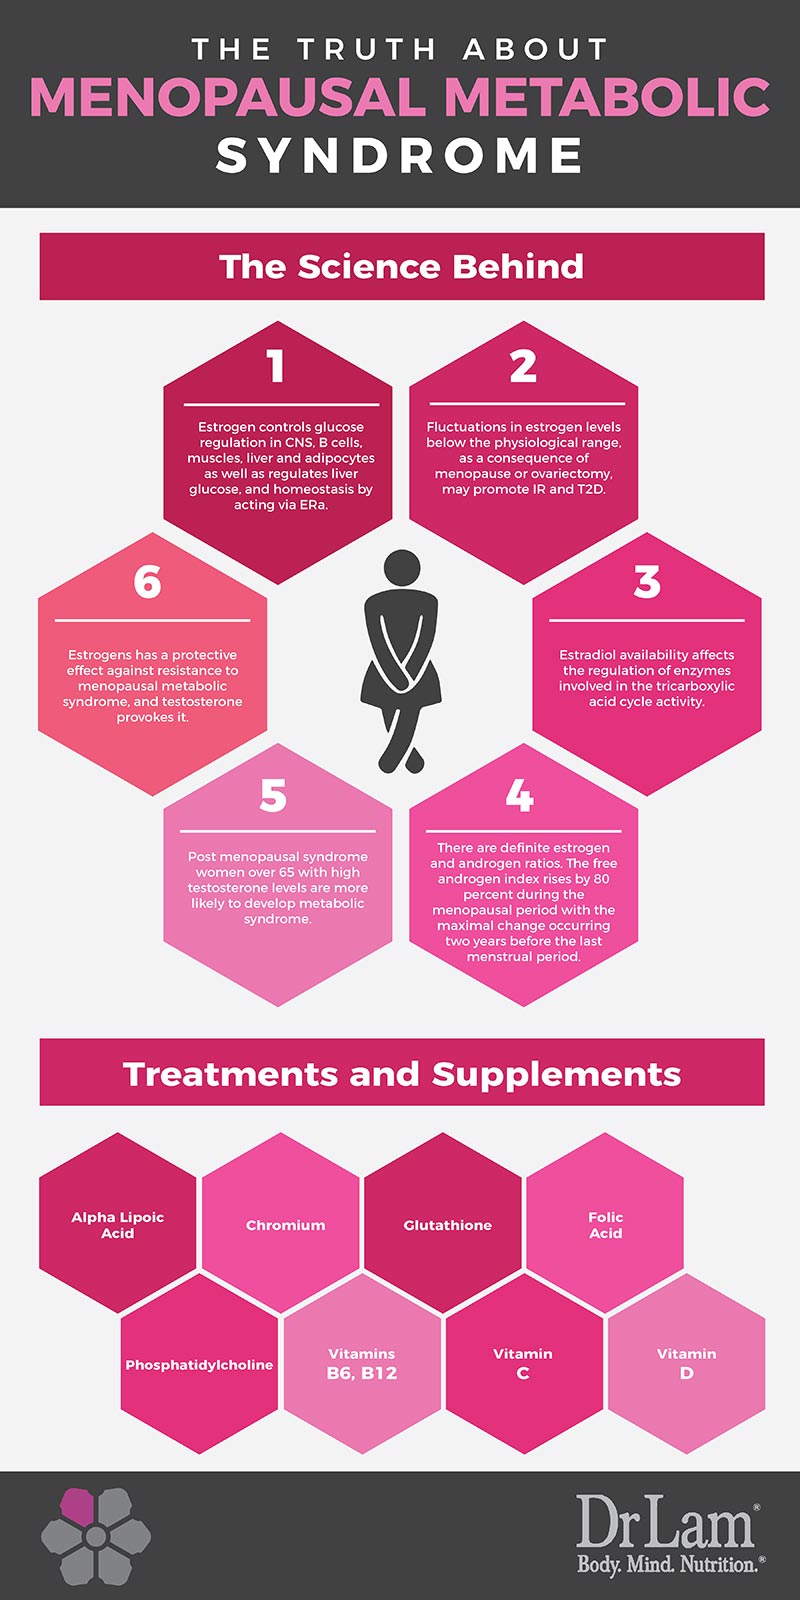 Check out this easy to understand infographic about the truth about Menopausal Metabolic Syndrome